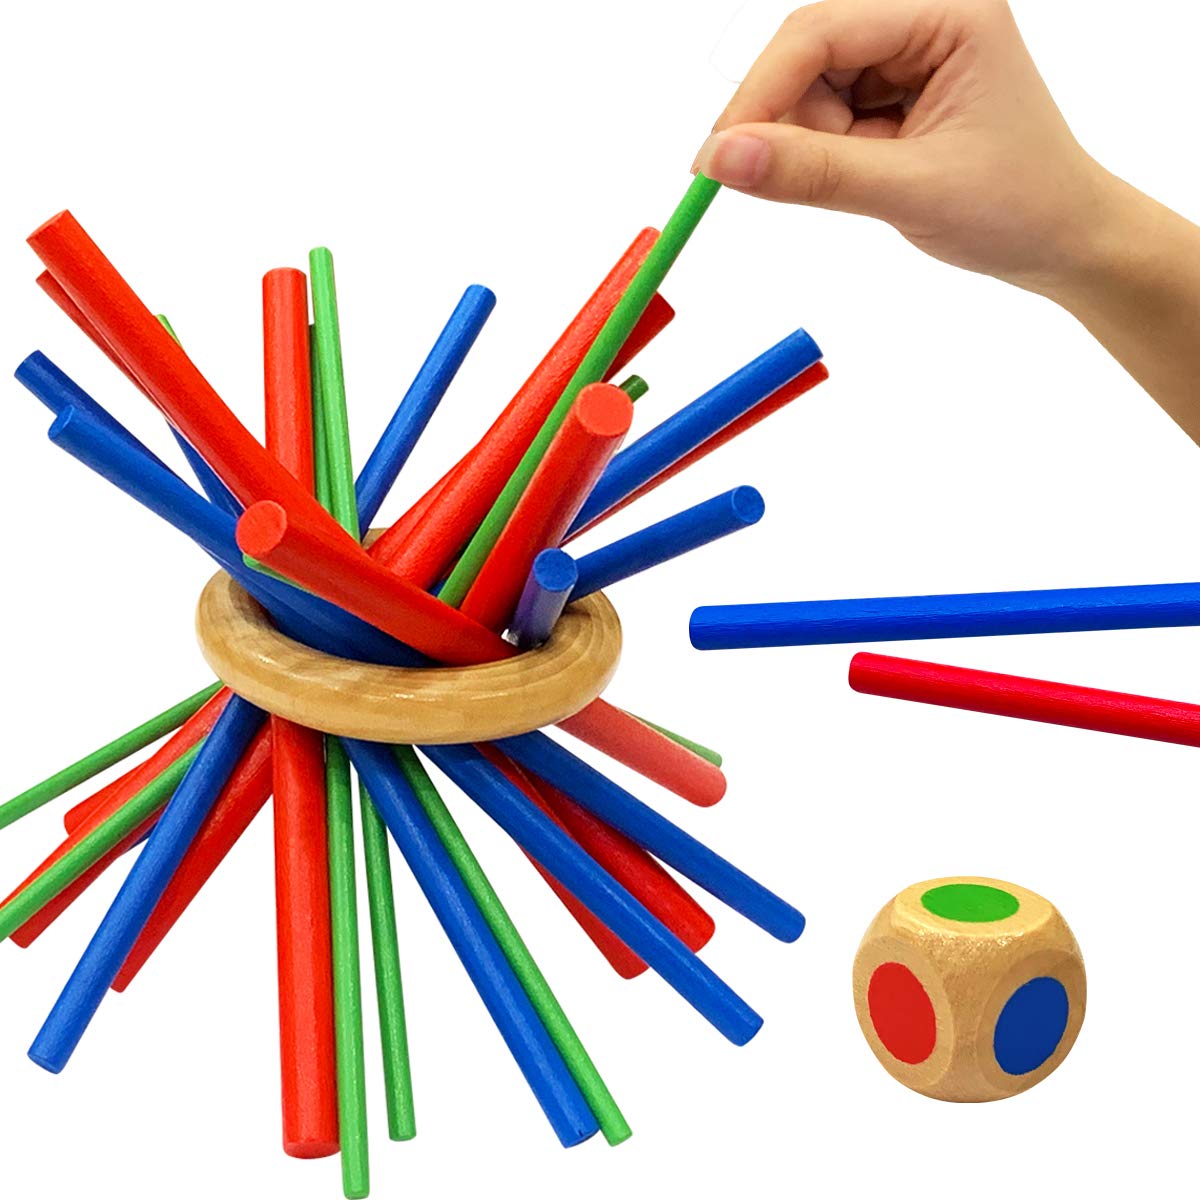 Keep It Steady Fun Family Games for Kids and Adults - Balance & Patience Training - Wooden Stick Toys for Creative Kids Games